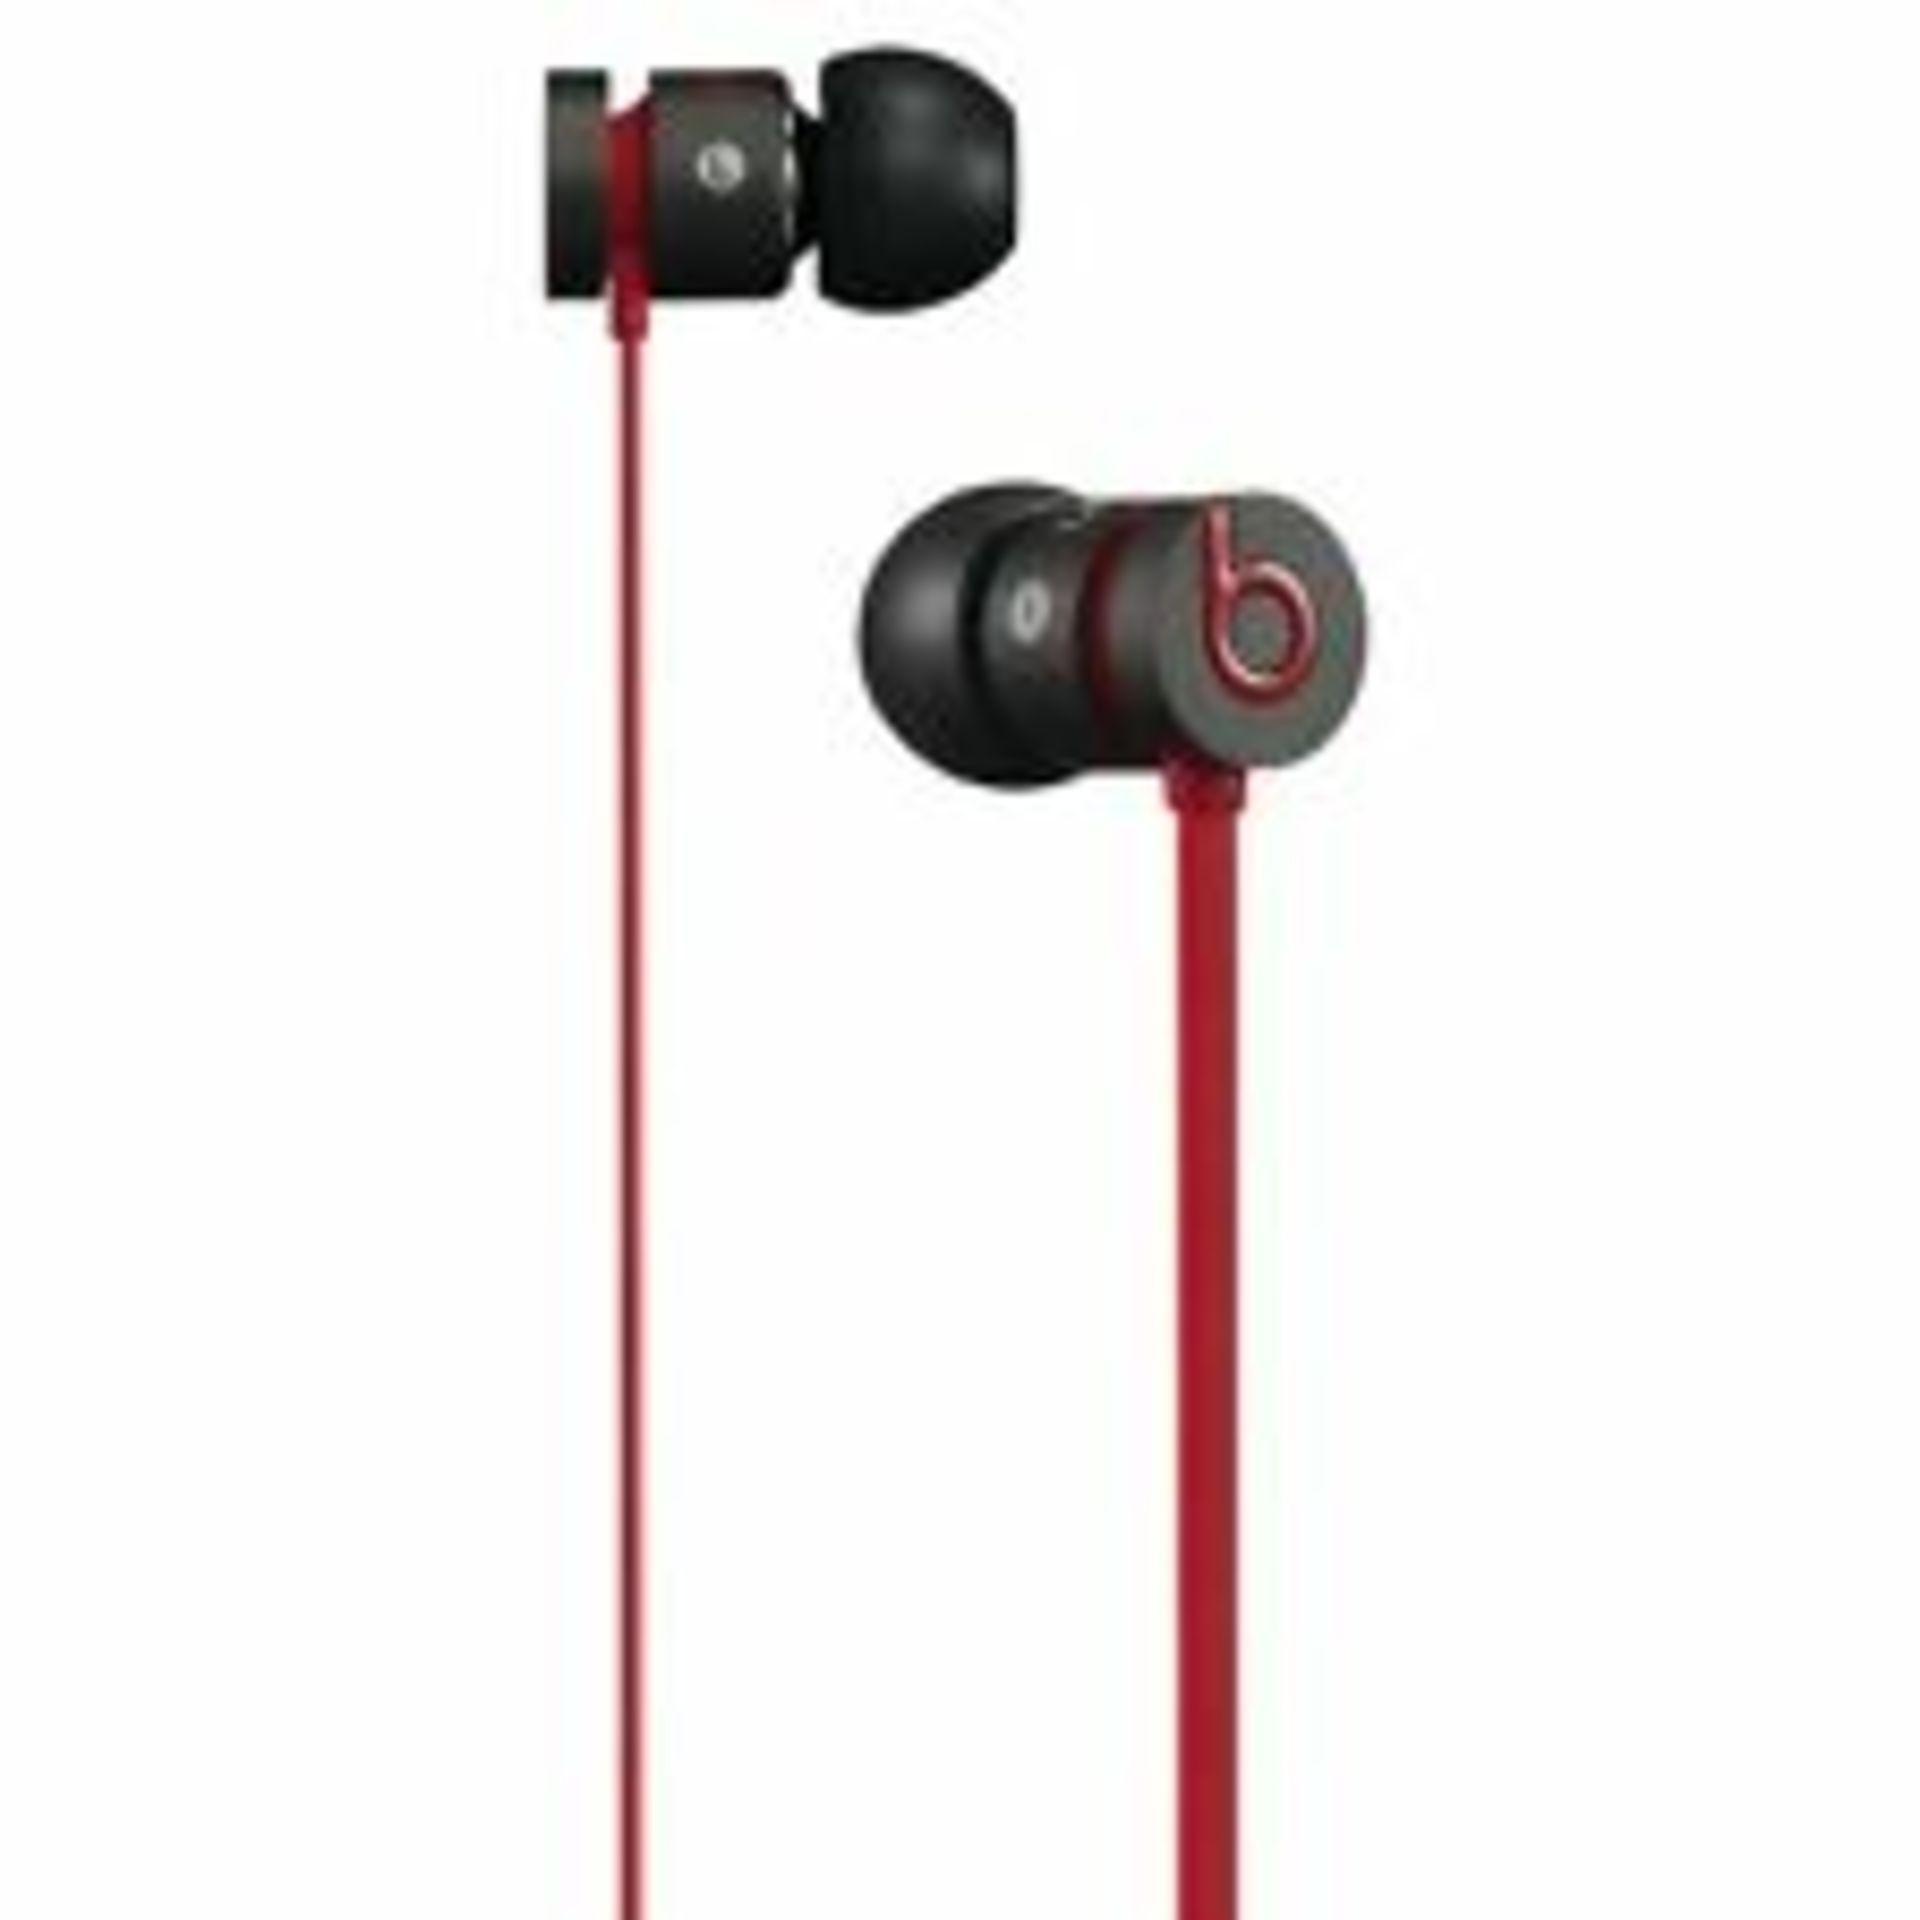 V Grade A/B Beats UrBeats Wired In-Ear Headphones - Black & Red (OEM Boxed)